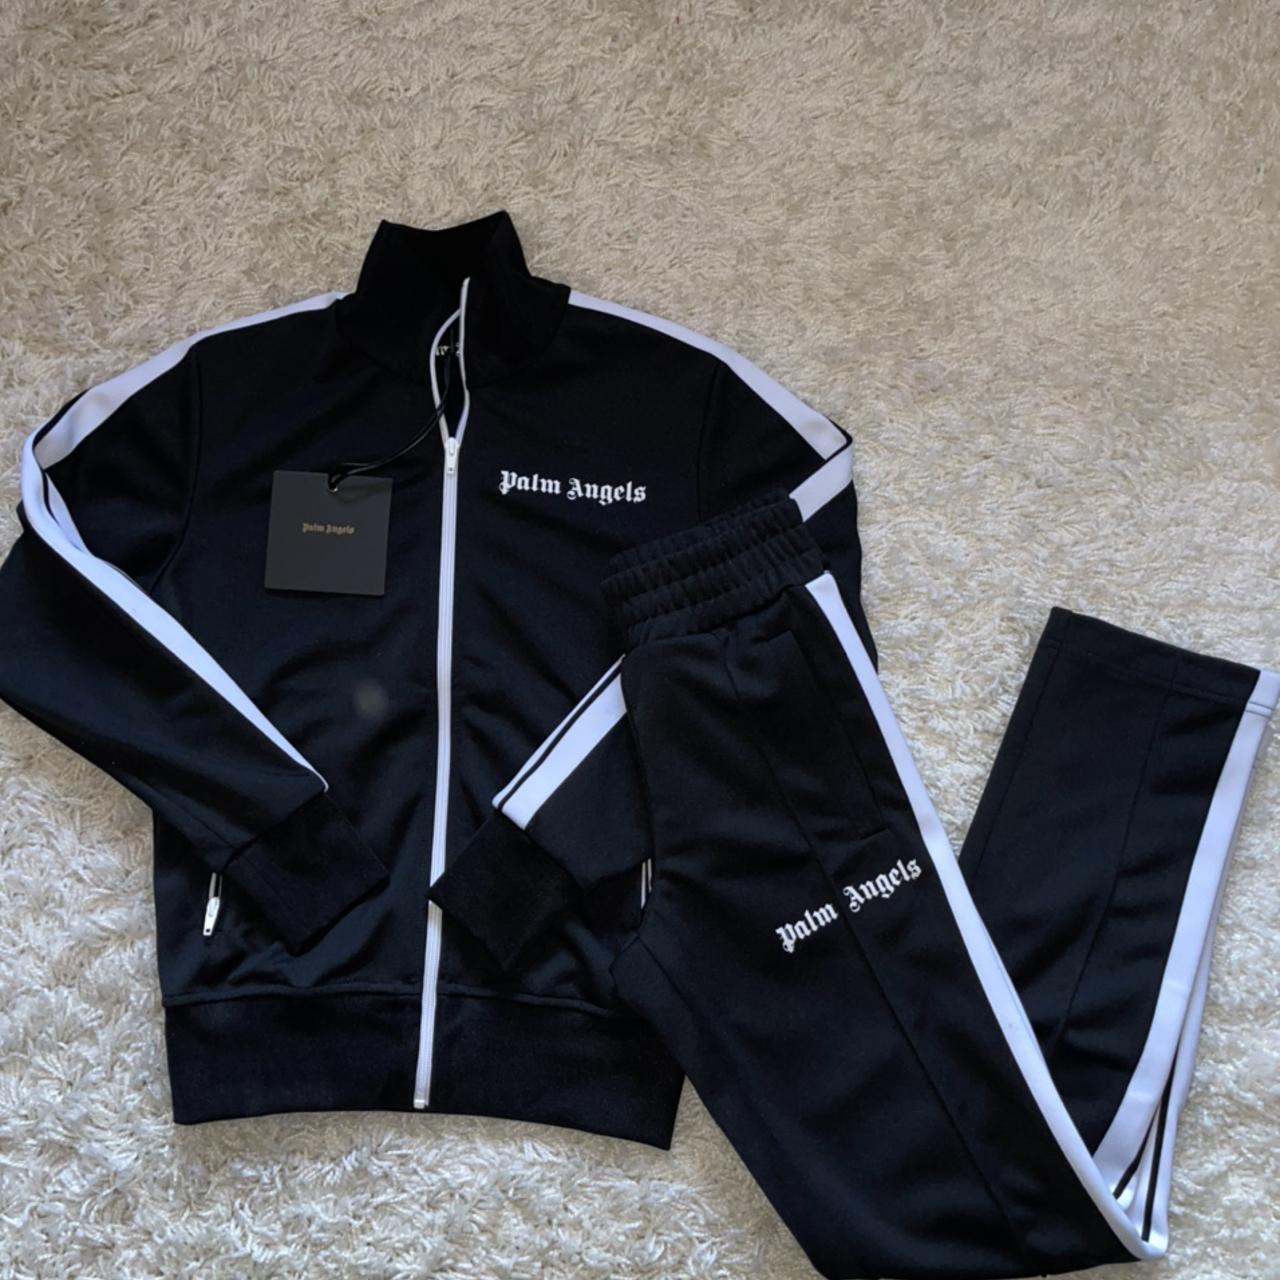 Palm Angels tracksuit set, available to buy as